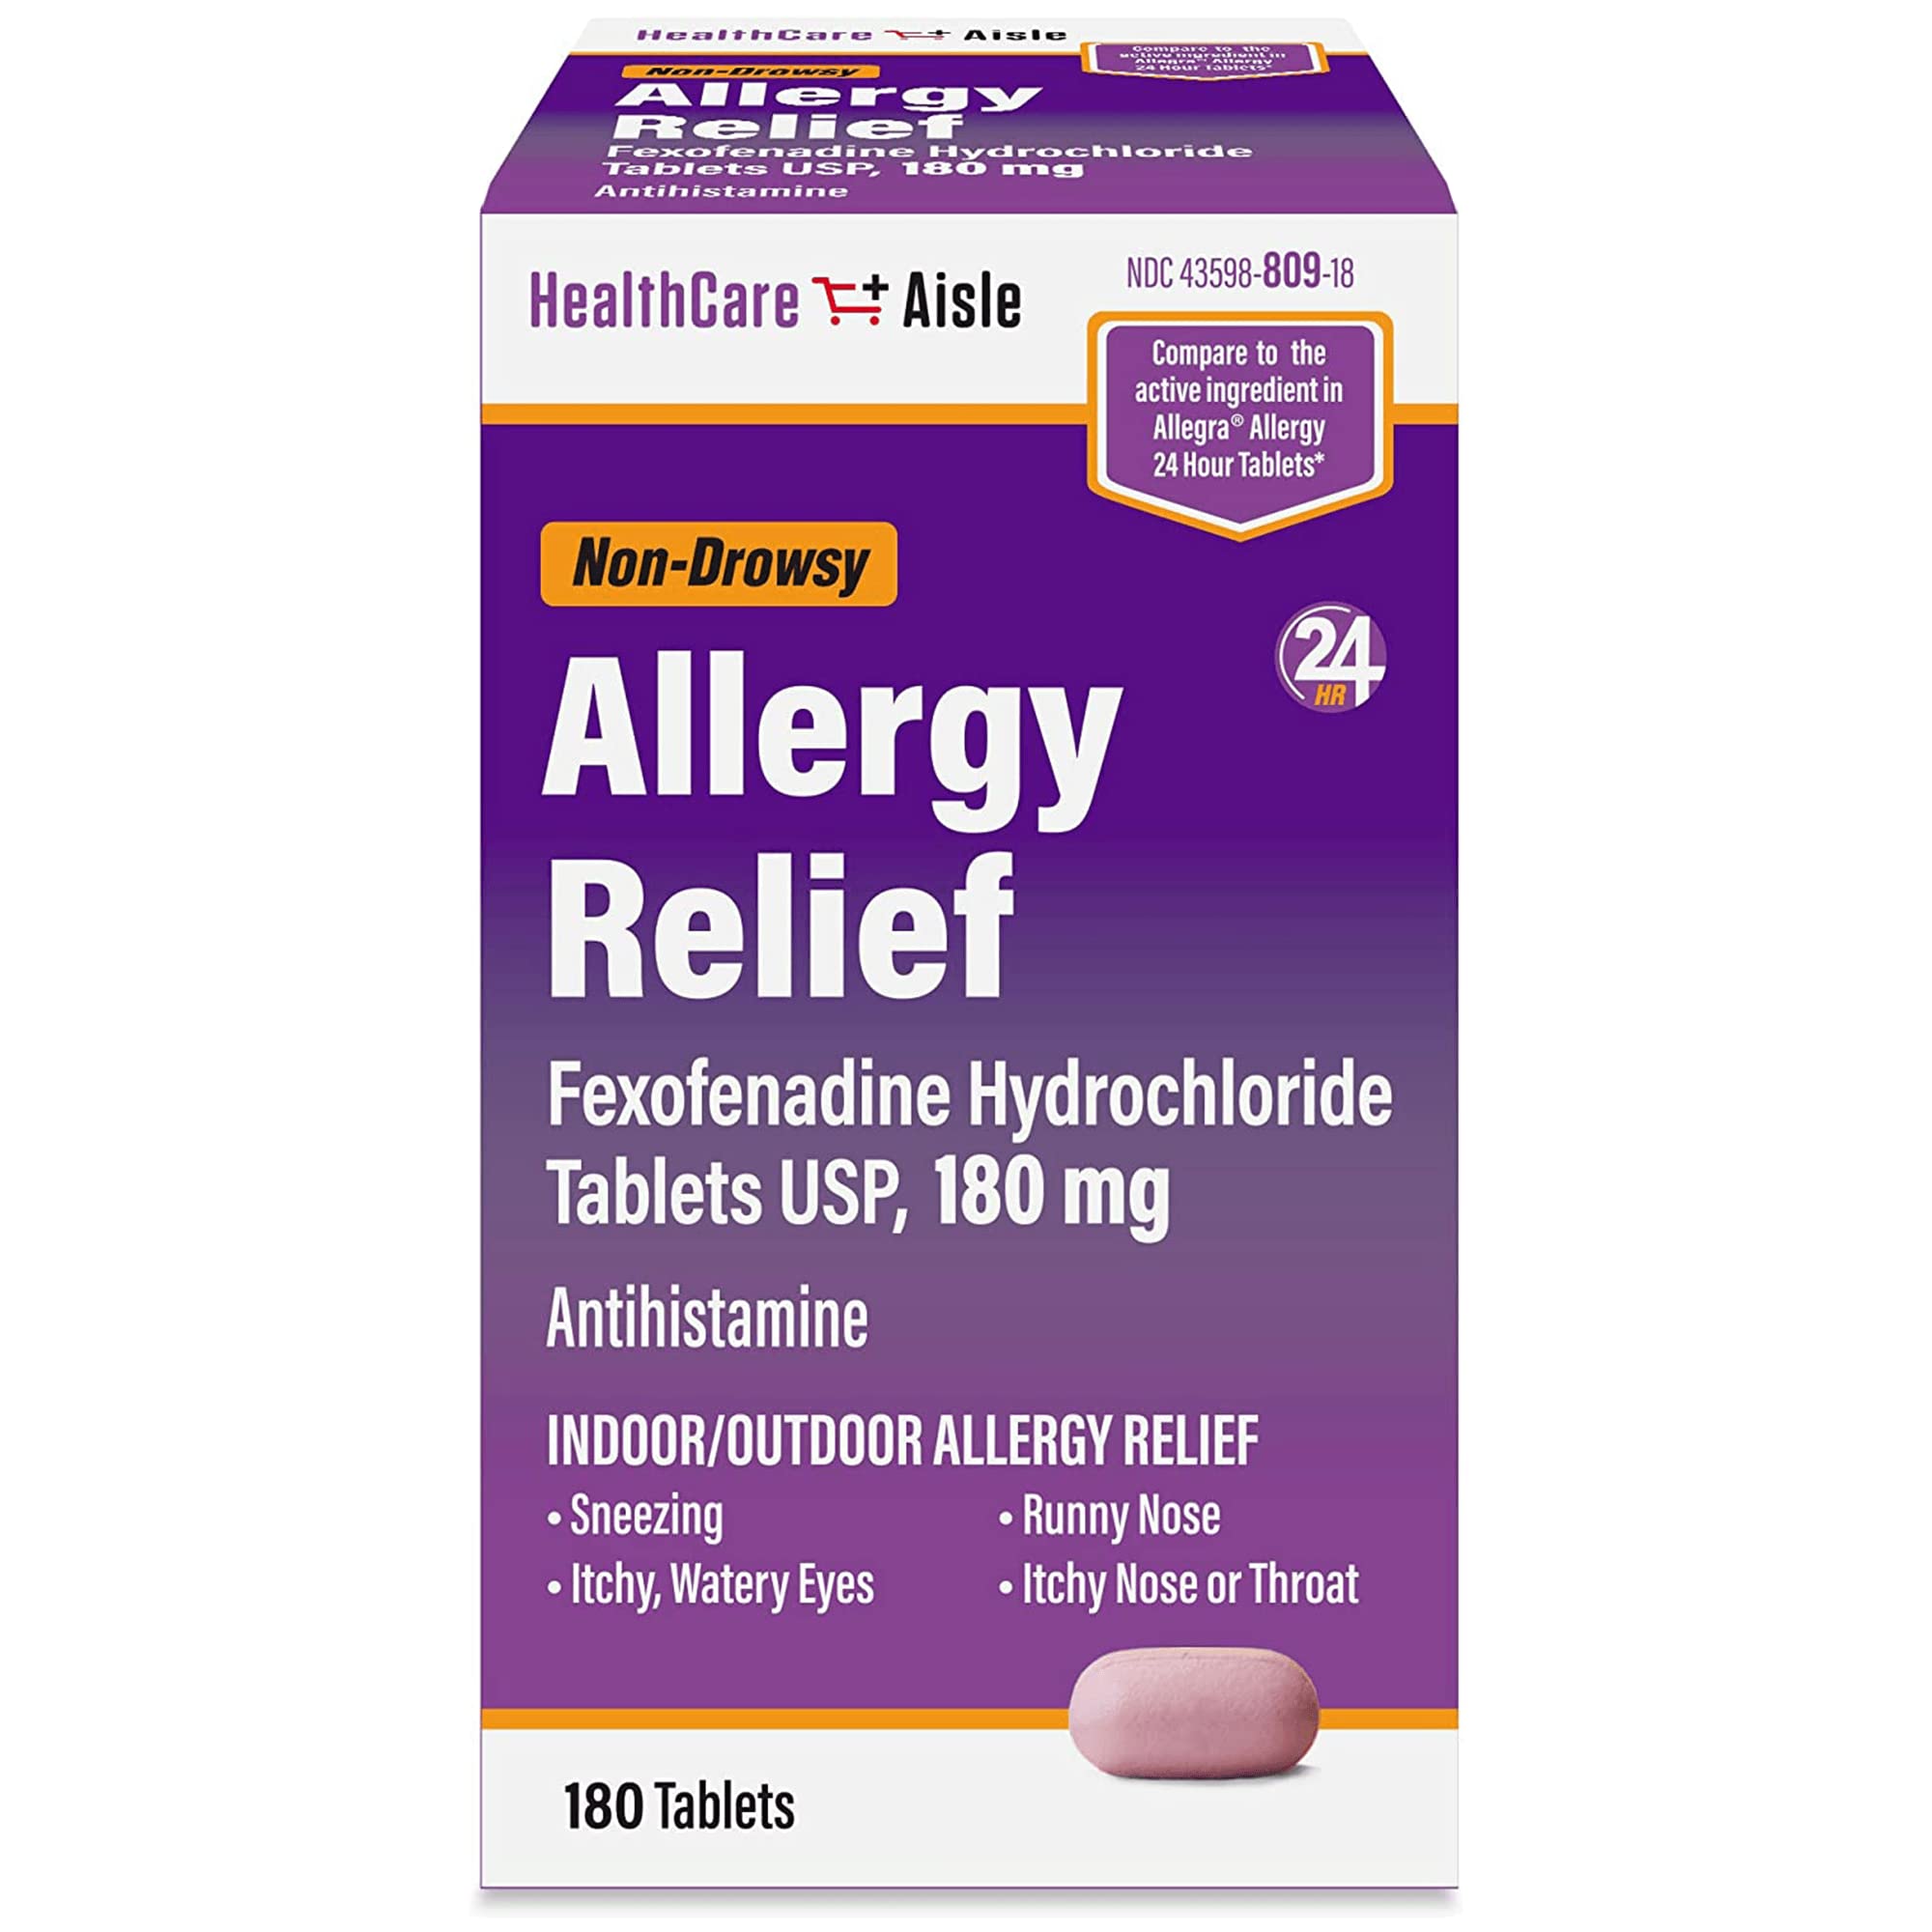 HealthCareAisle Allergy Relief - Fexofenadine Hydrochloride (Allegra generic) Tablets USP, 180 mg – 90 Tablets -- as low as $8.26 w/ 5 S&S Amazon